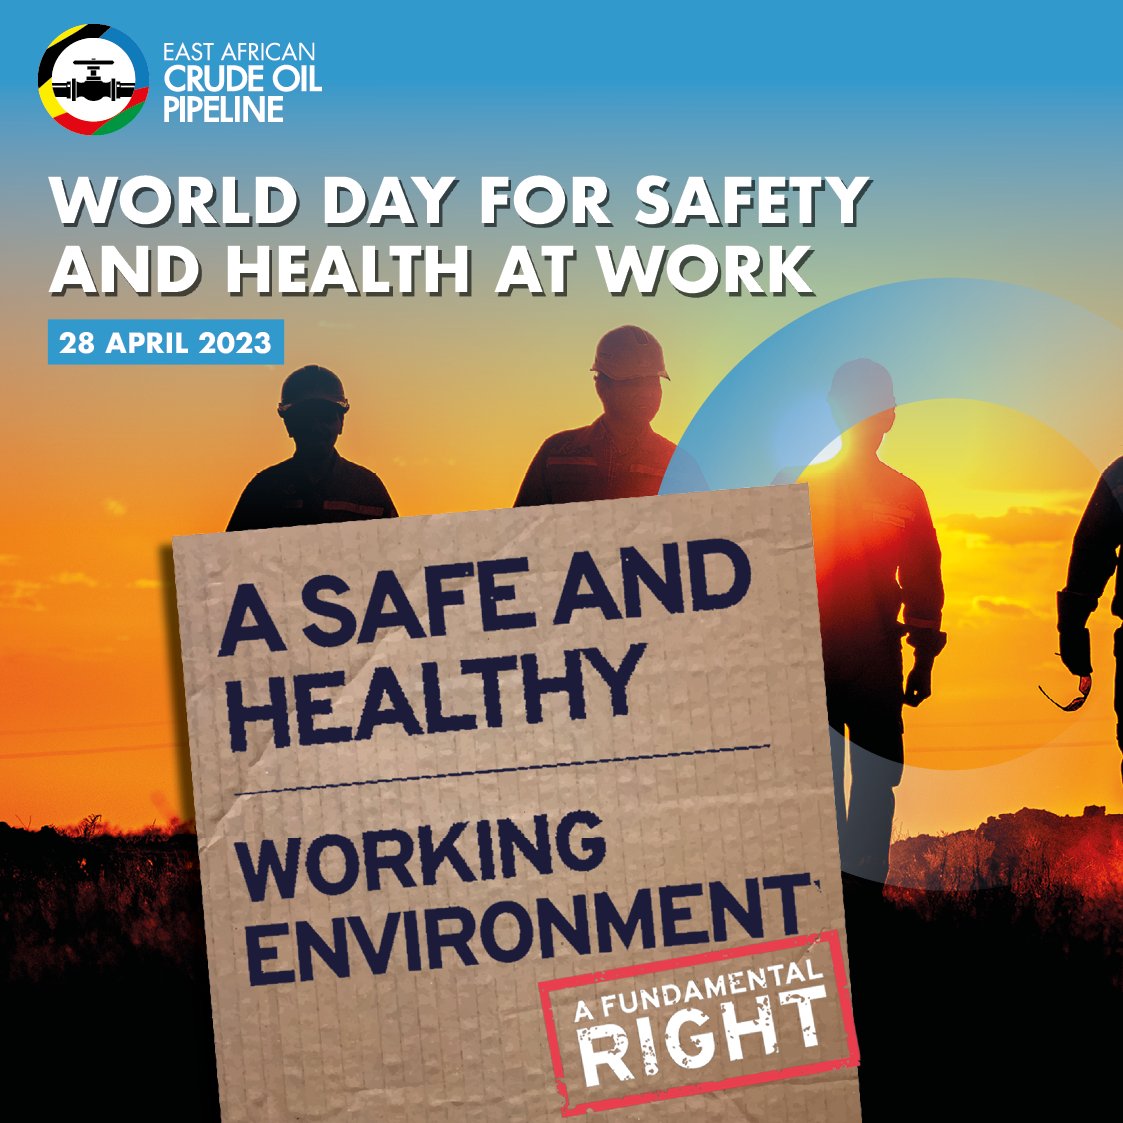 Happy World Safety Day!

A safe and healthy working environment is a fundamental principle and right at work. As safety is one of our core values and foundation of our activities, EACOP ensures that our workplace environment embodies a ZERO HARM safety culture. 

#worldsafetyday